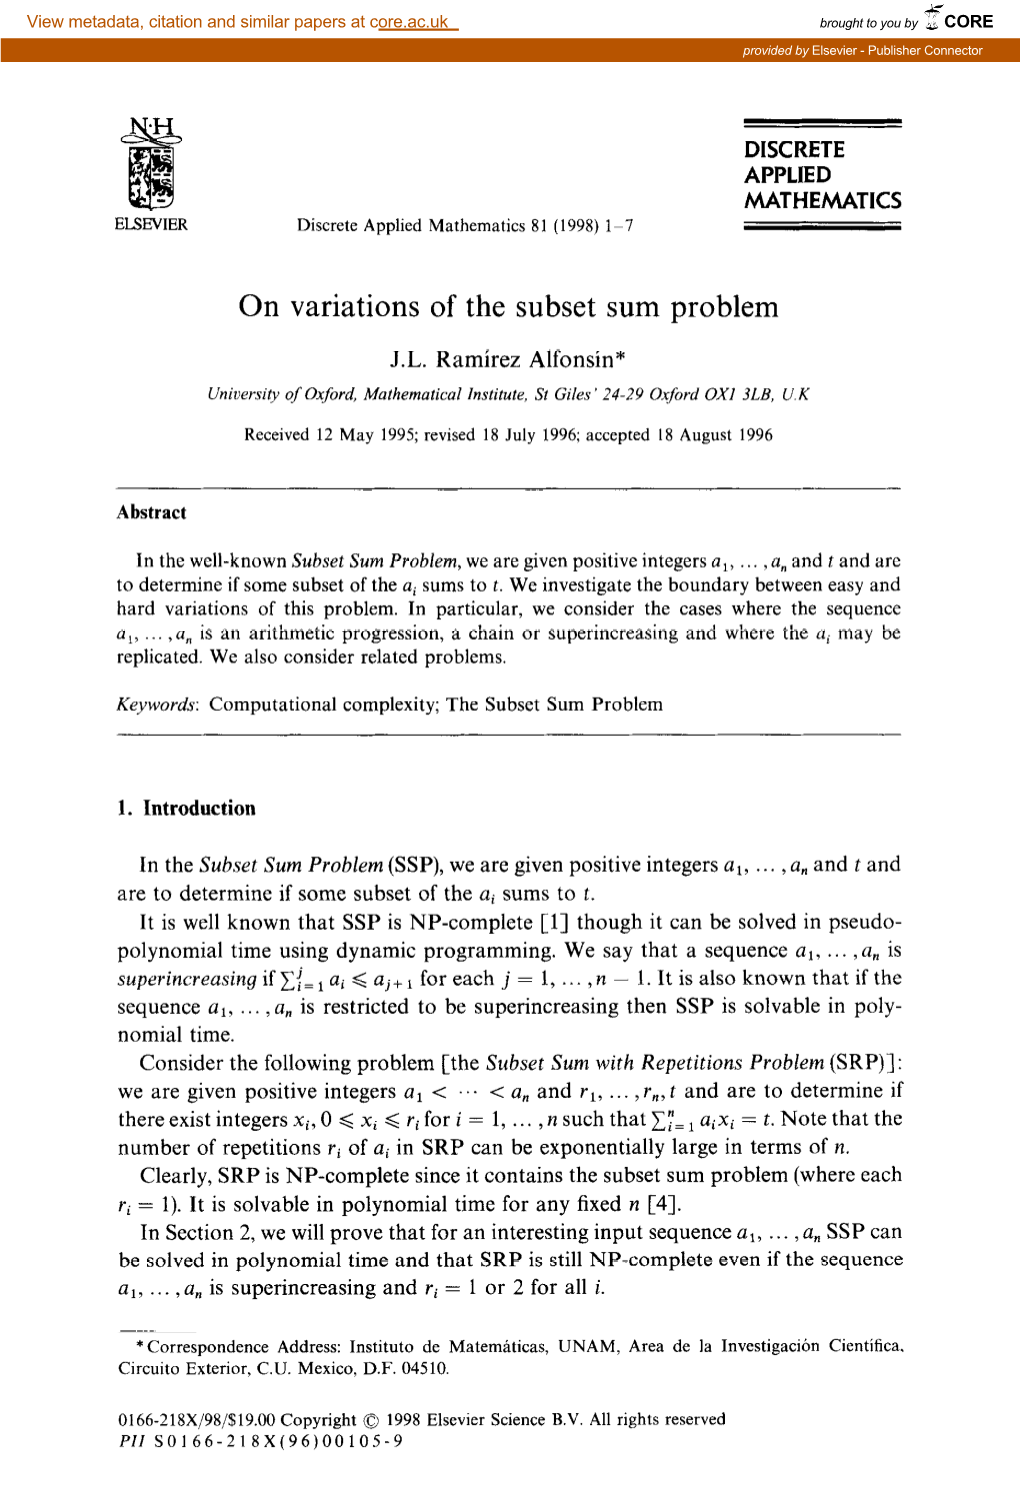 On Variations of the Subset Sum Problem